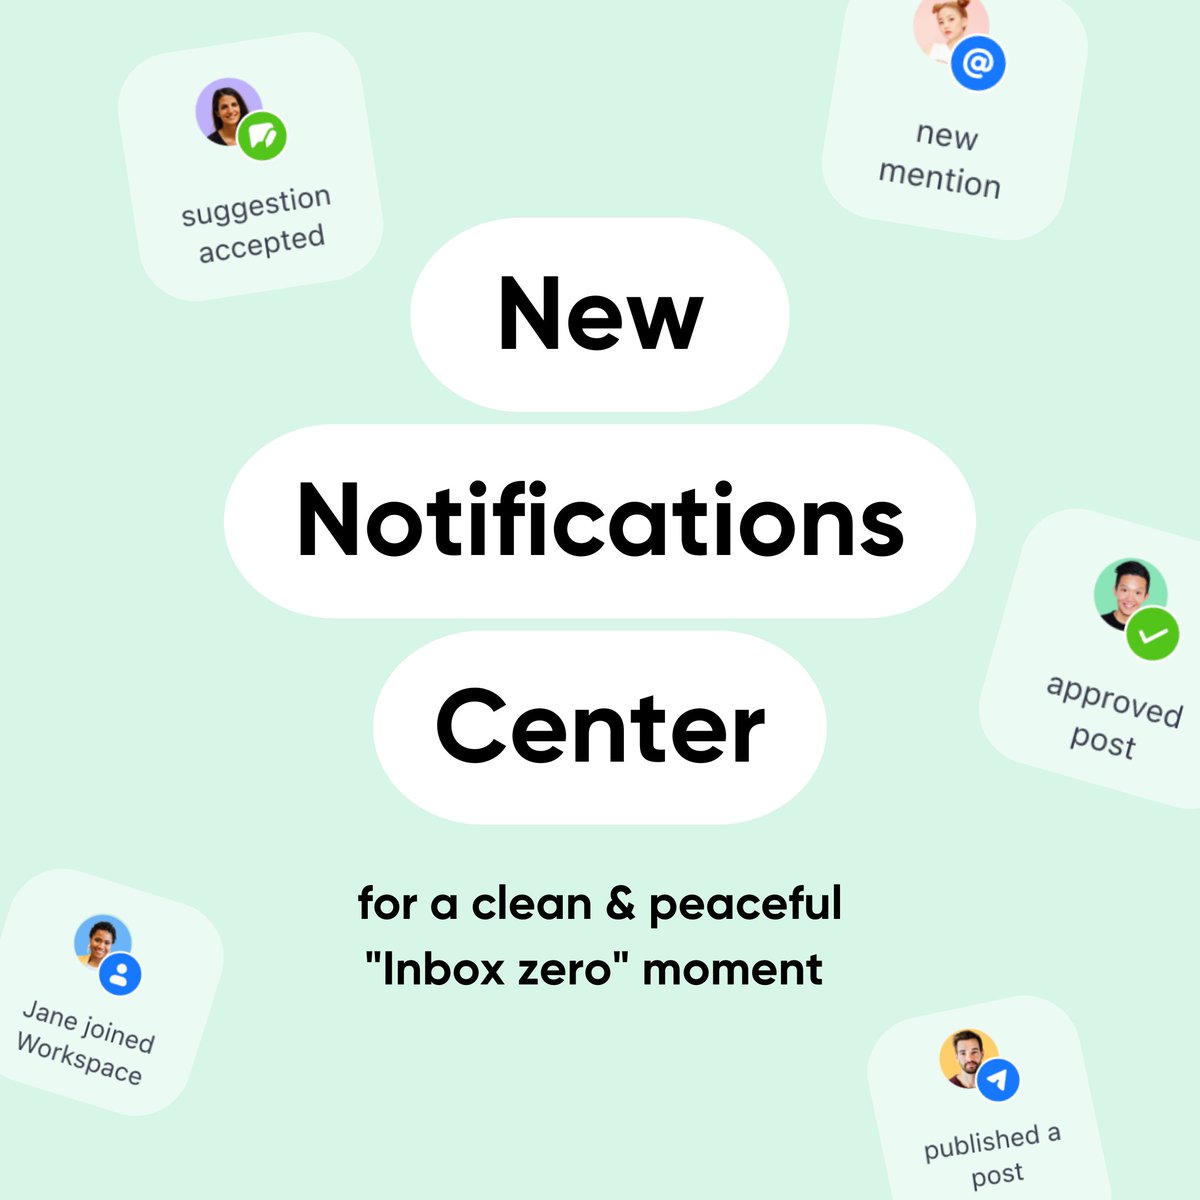 Our resolutions are always around how we can make content management more efficient. The latest step towards this? An enhanced Notifications center. 🎉🎉🎉 #inboxzero